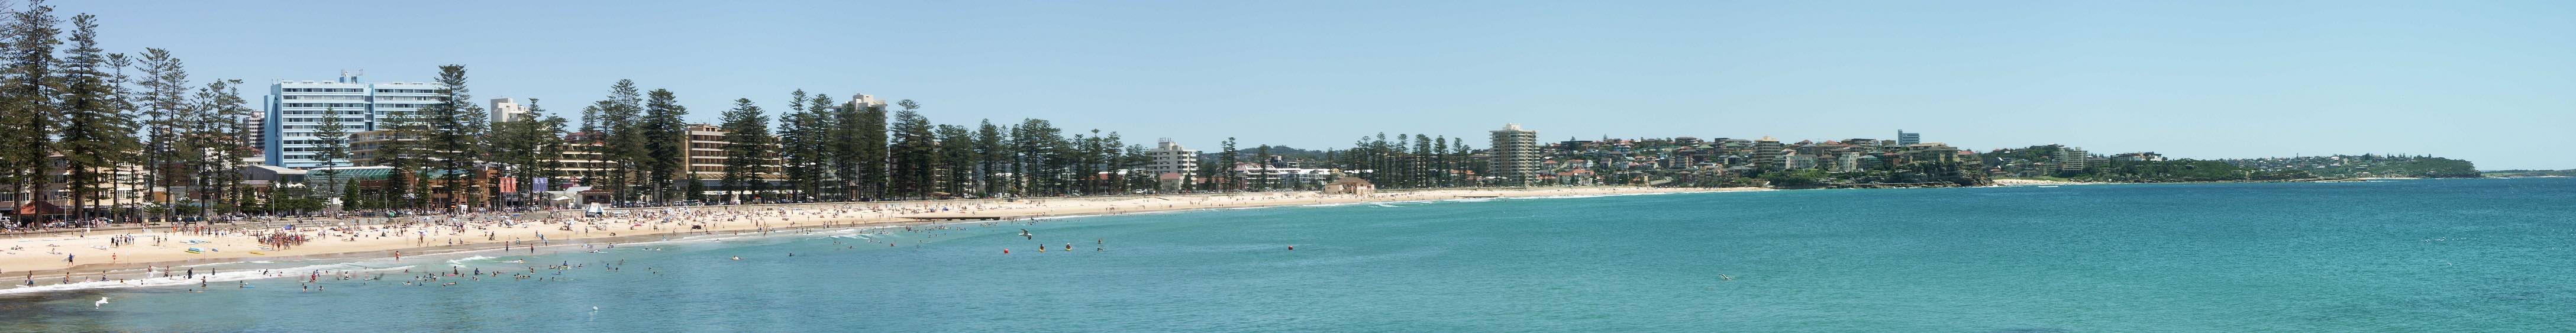 Manly_Beach_-_Pano